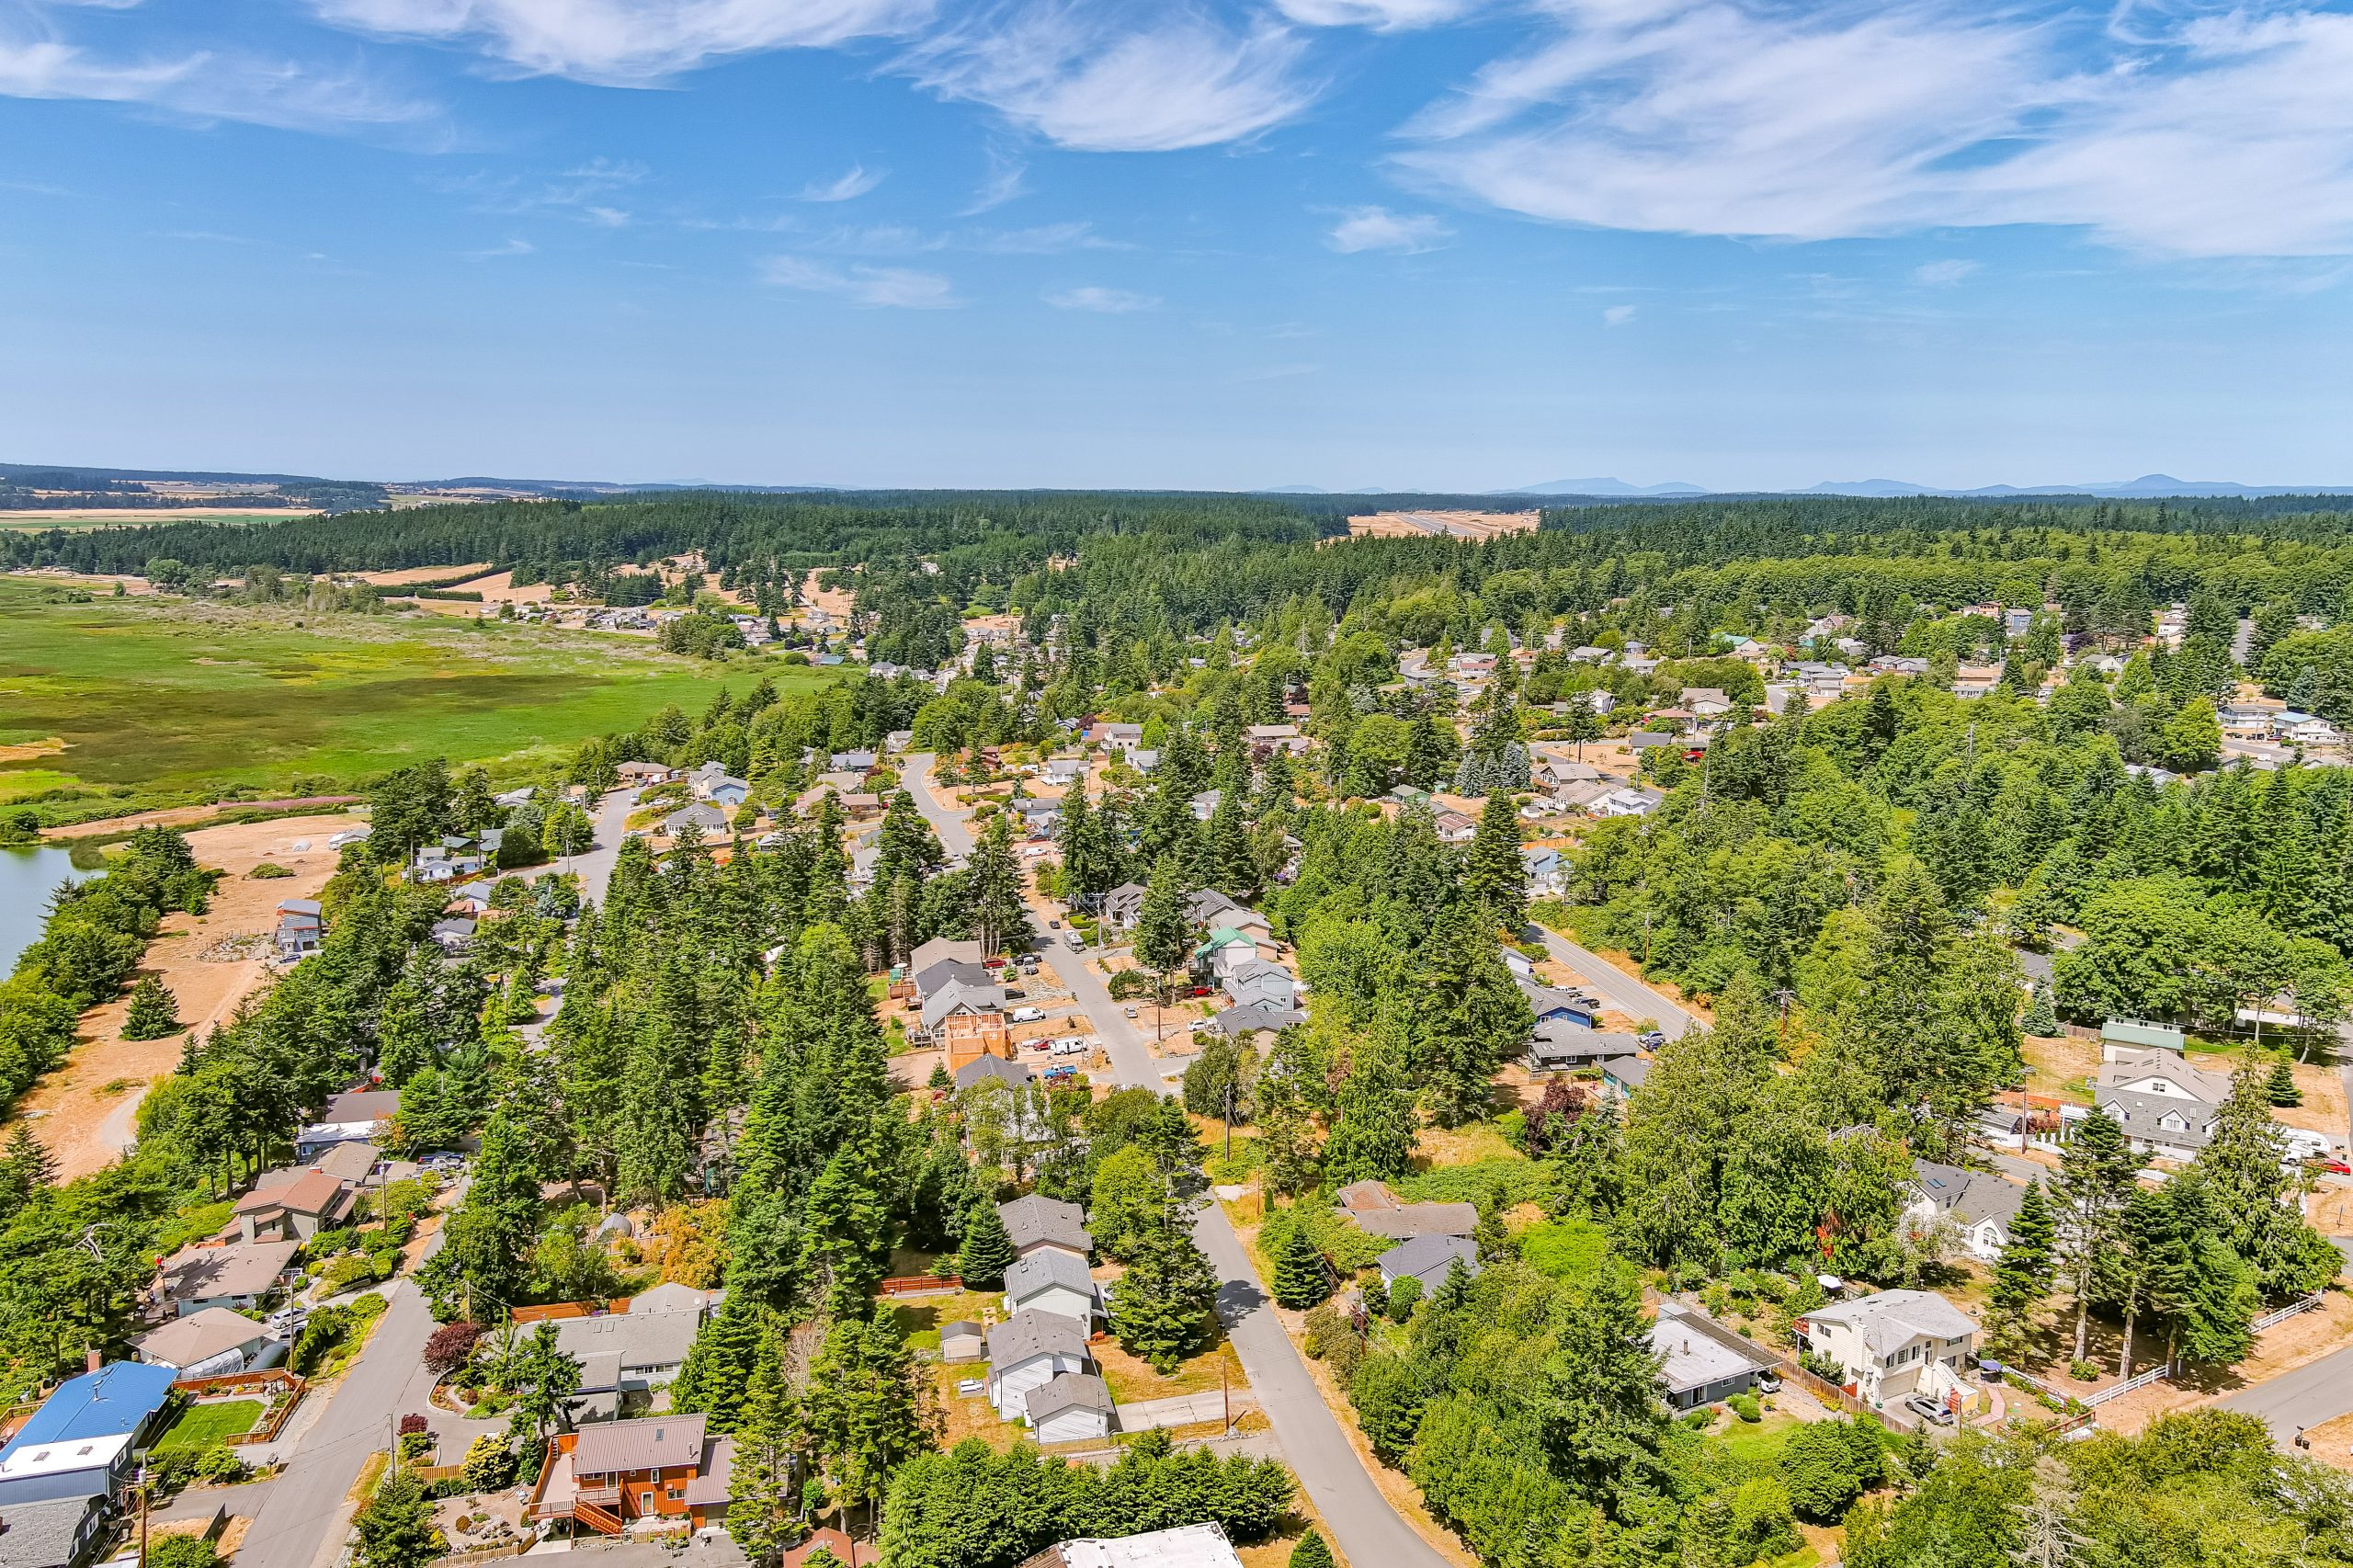 Admirals Cove, Coupeville, Washington, Whidbey Island, PNW, Neighborhoods, Whidbey island Living, Real Estate, Homes